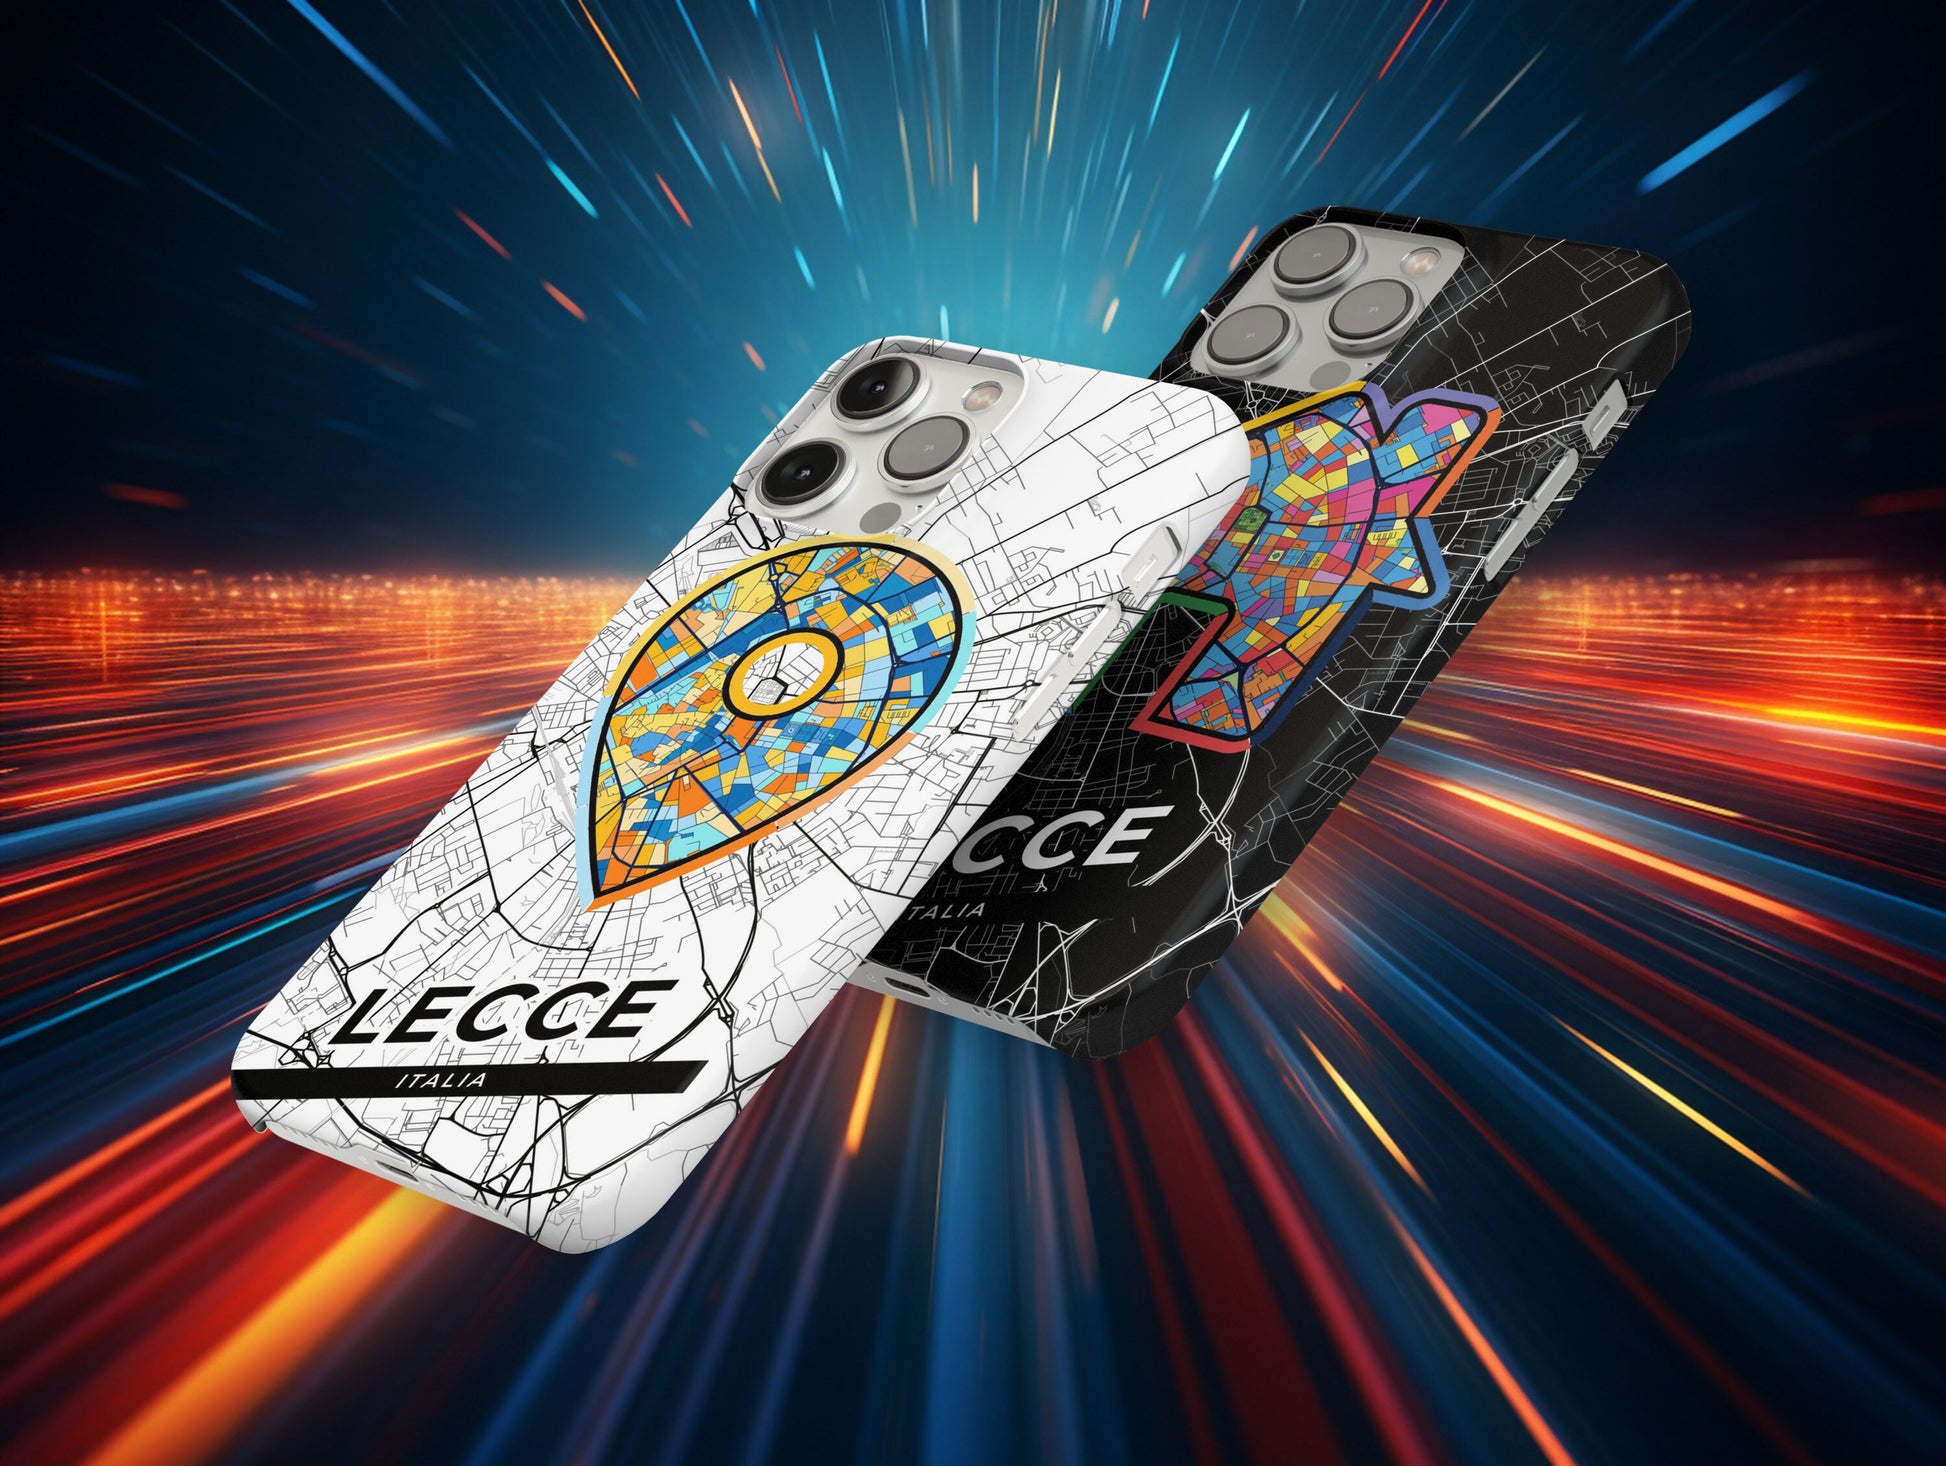 Lecce Italy slim phone case with colorful icon. Birthday, wedding or housewarming gift. Couple match cases.